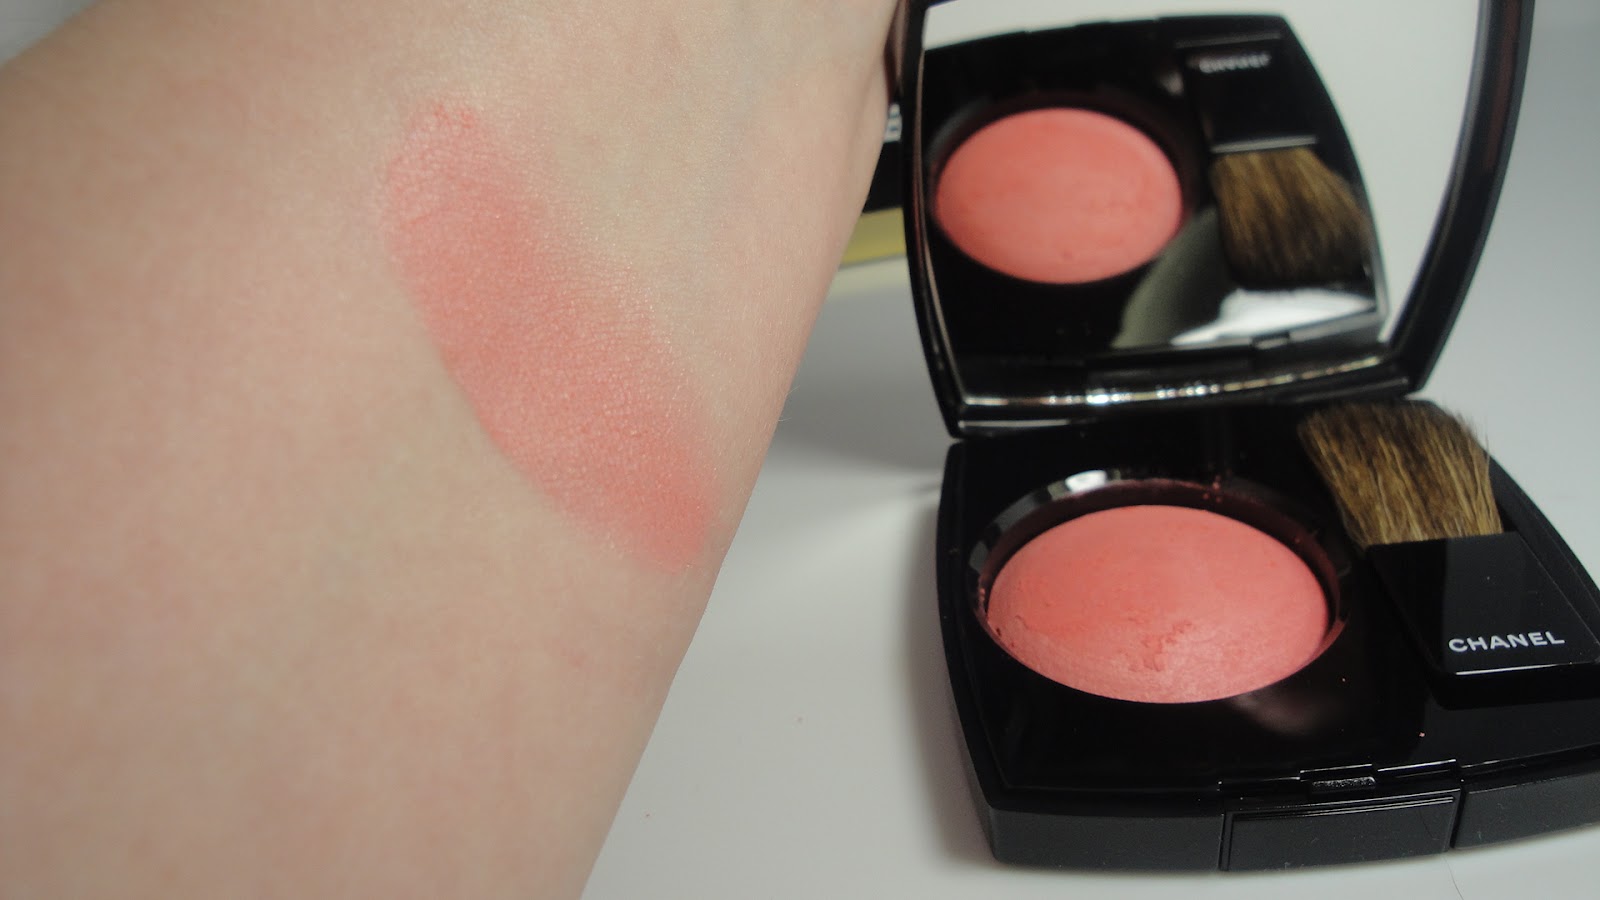 Jayded Dreaming Beauty Blog : 69 FLEUR DE LOTUS CHANEL JOUES CONTRASTE  POWDER BLUSH - SWATCHES AND REVIEW